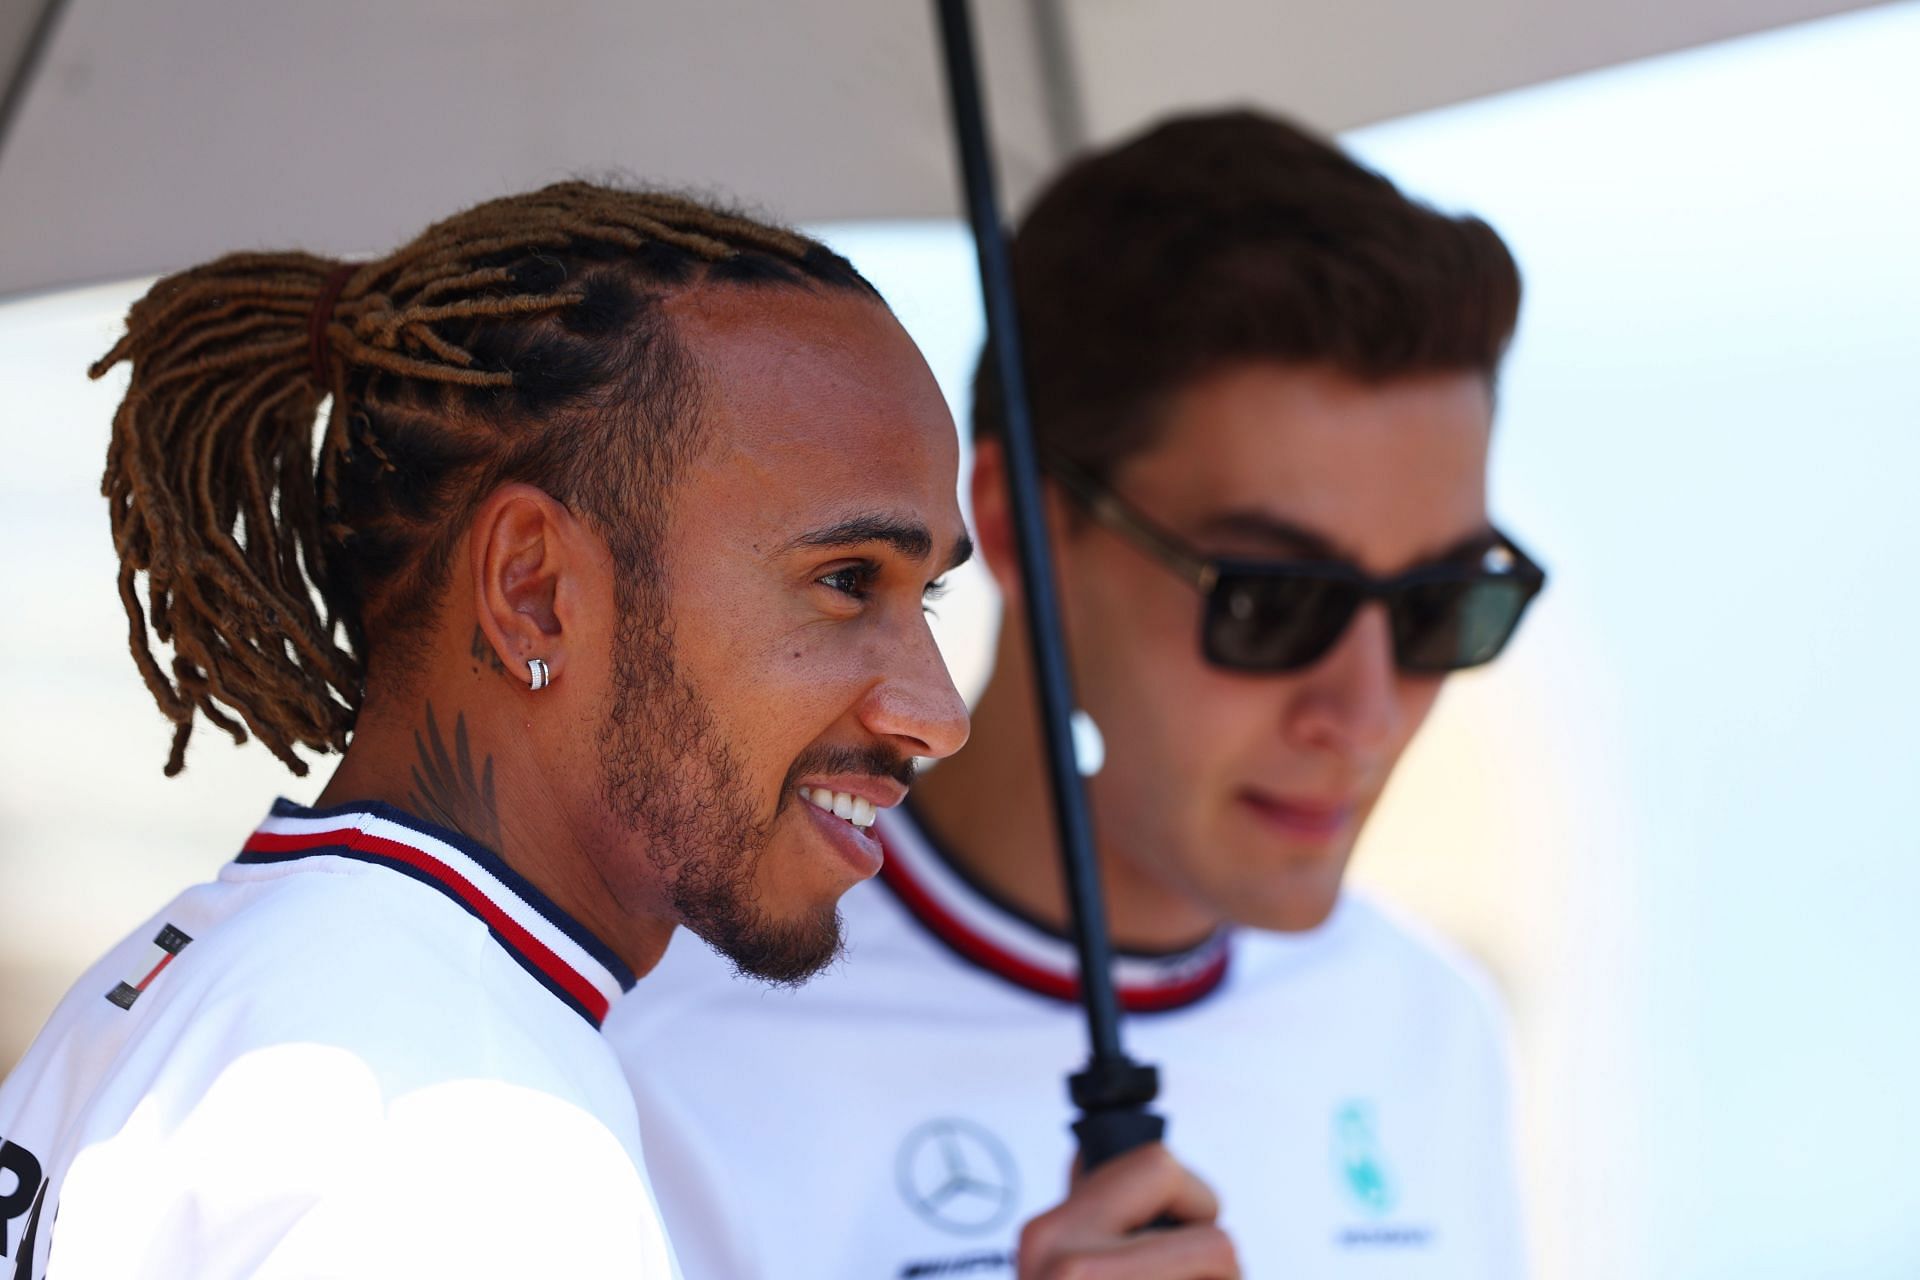 Both Lewis Hamilton and George Russell have maintained a cordial relationship this season